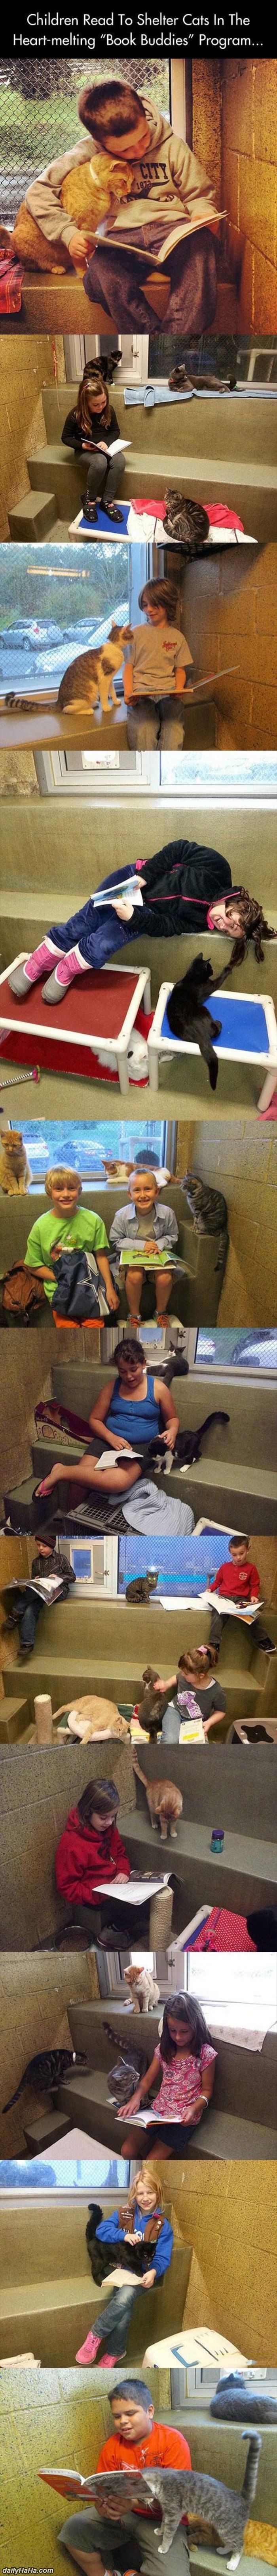 children reading to shelter animals funny picture